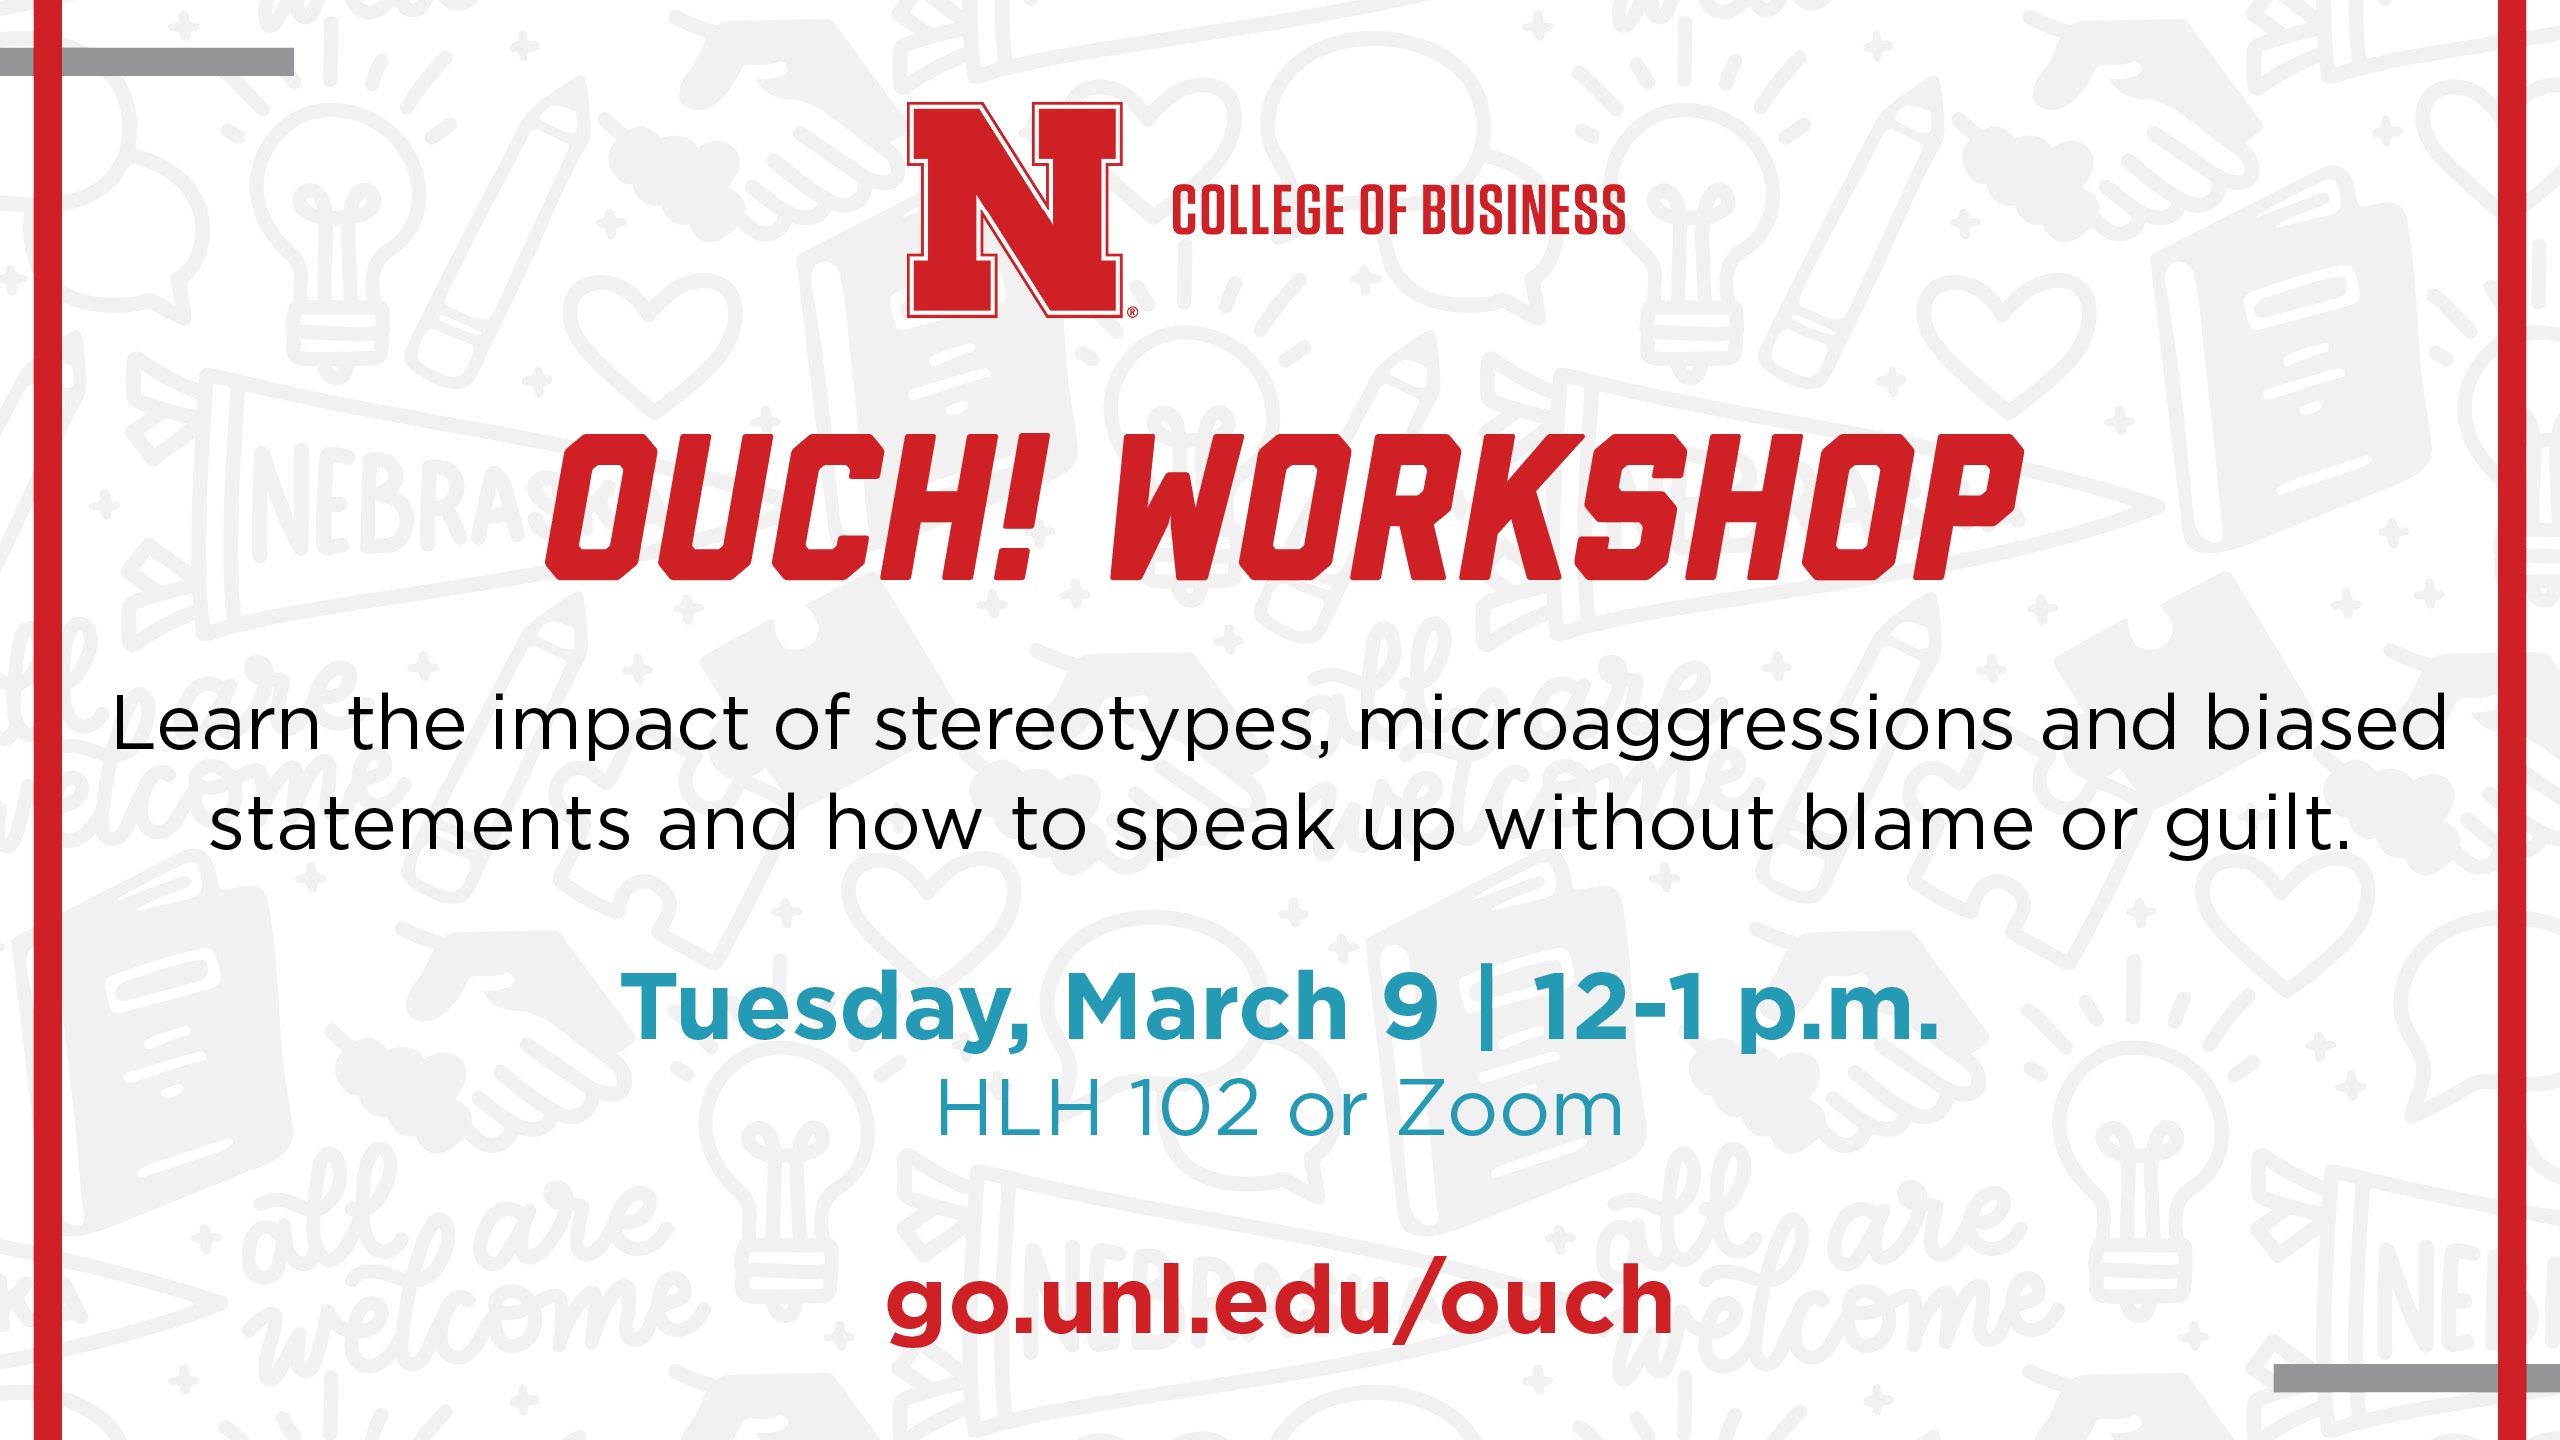 Both in-person and Zoom options are available for the March 9 workshop at the College of Business.